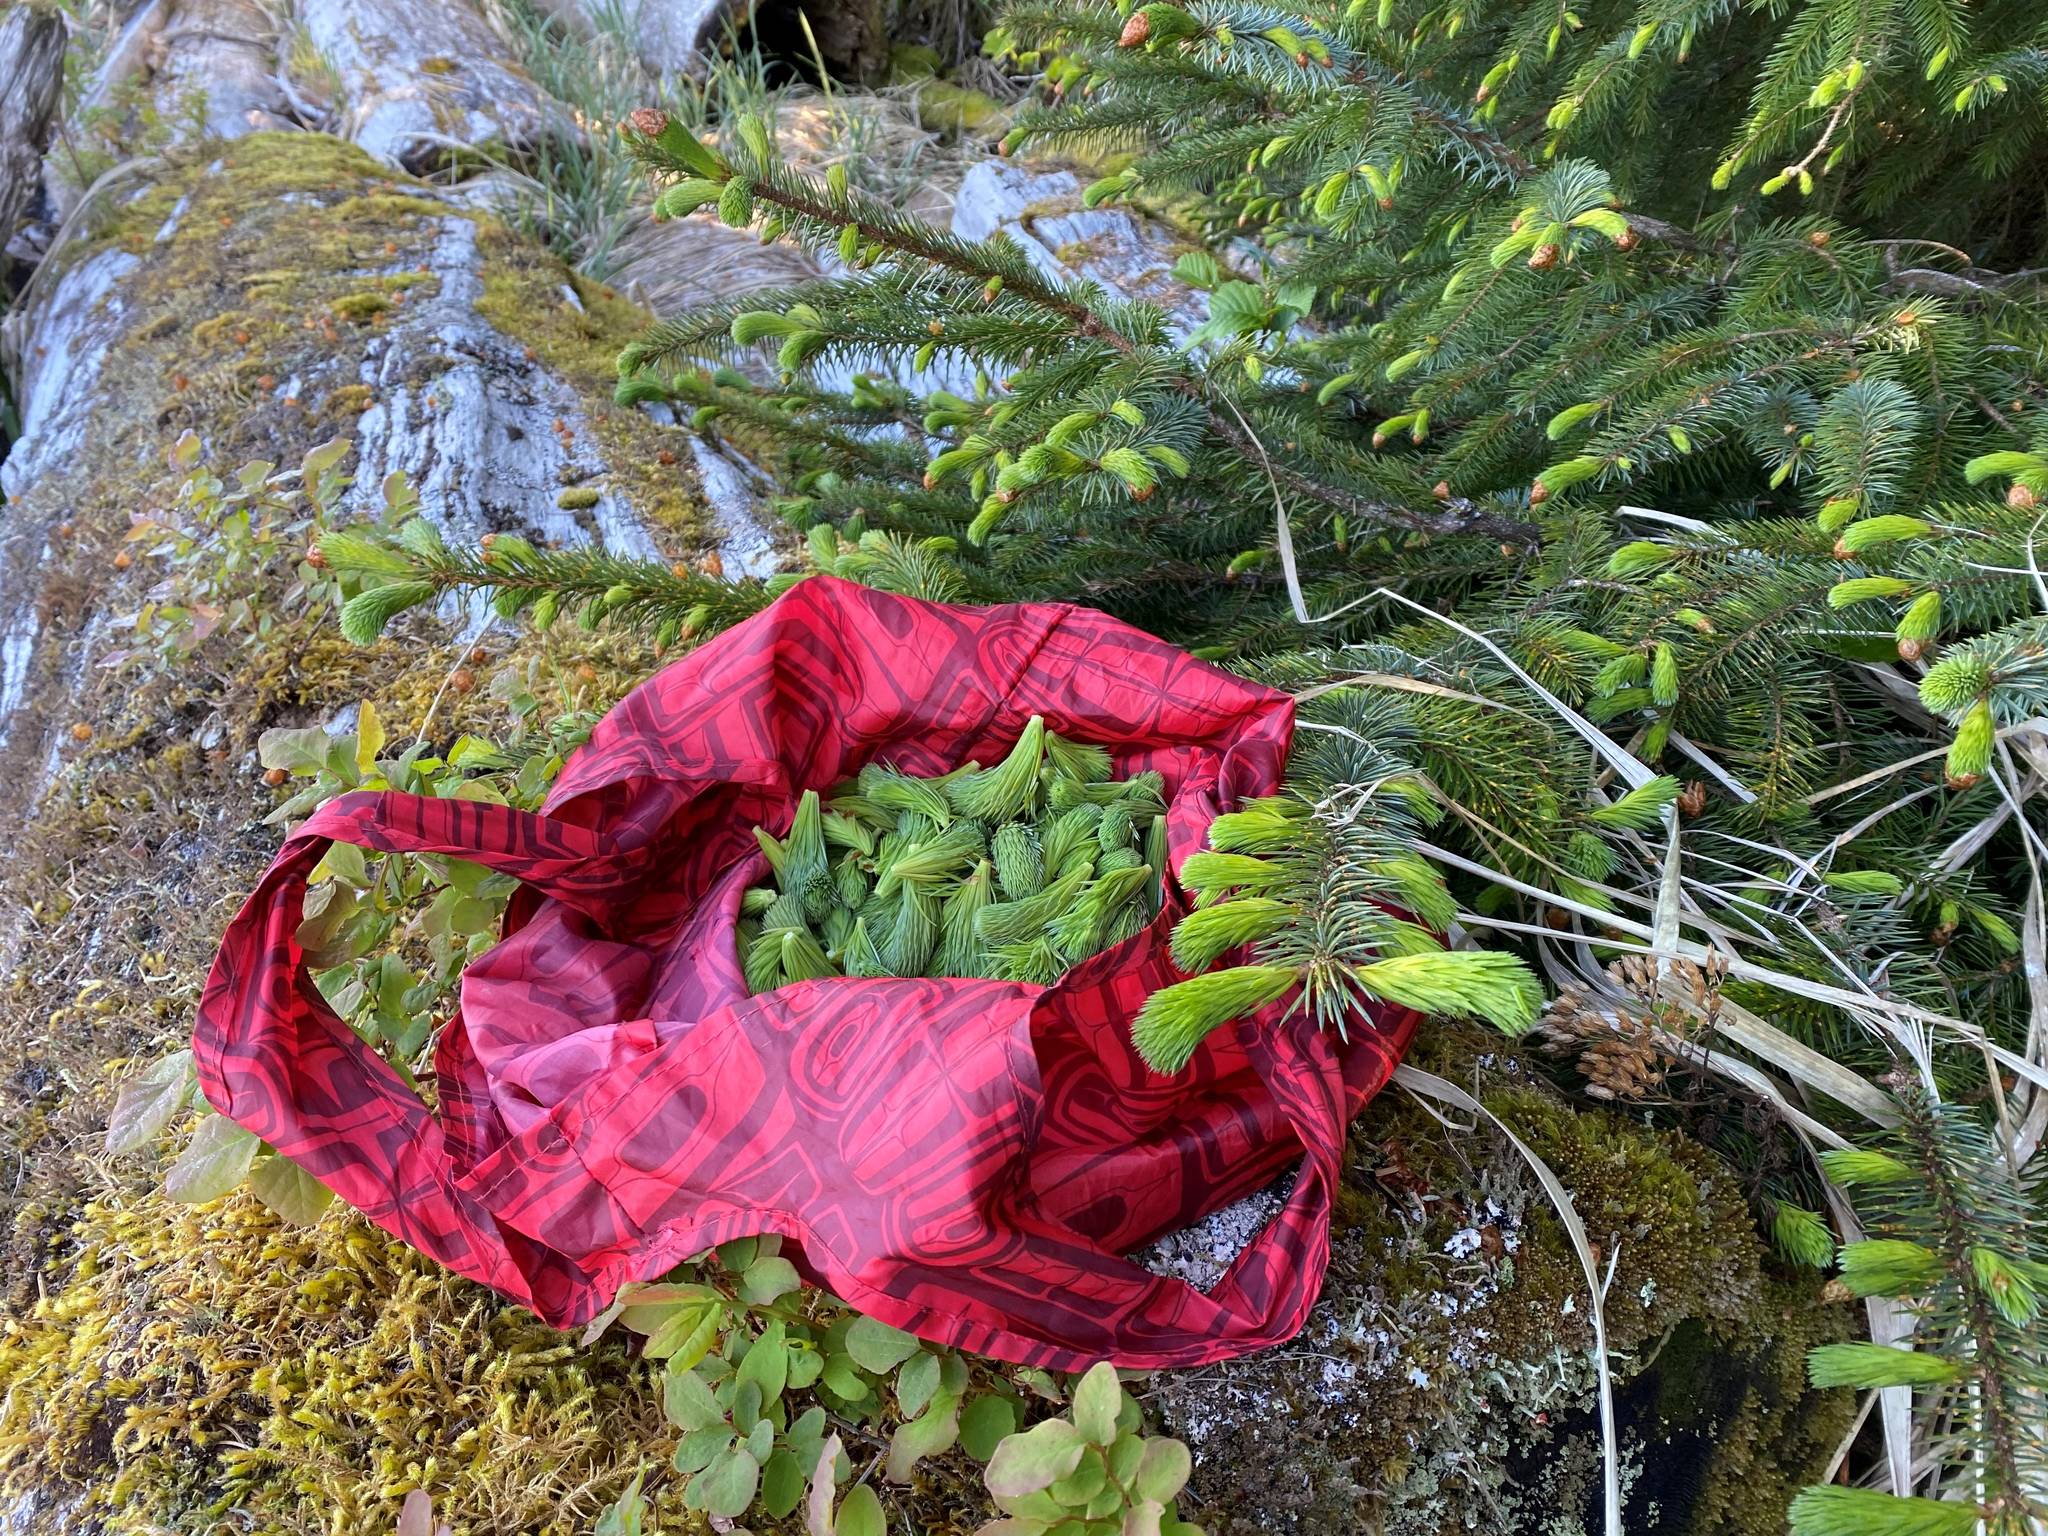 Harvested spruce tips sit in waterproof cloth bag(Vivian Faith Prescott / For the Capital City Weekly)